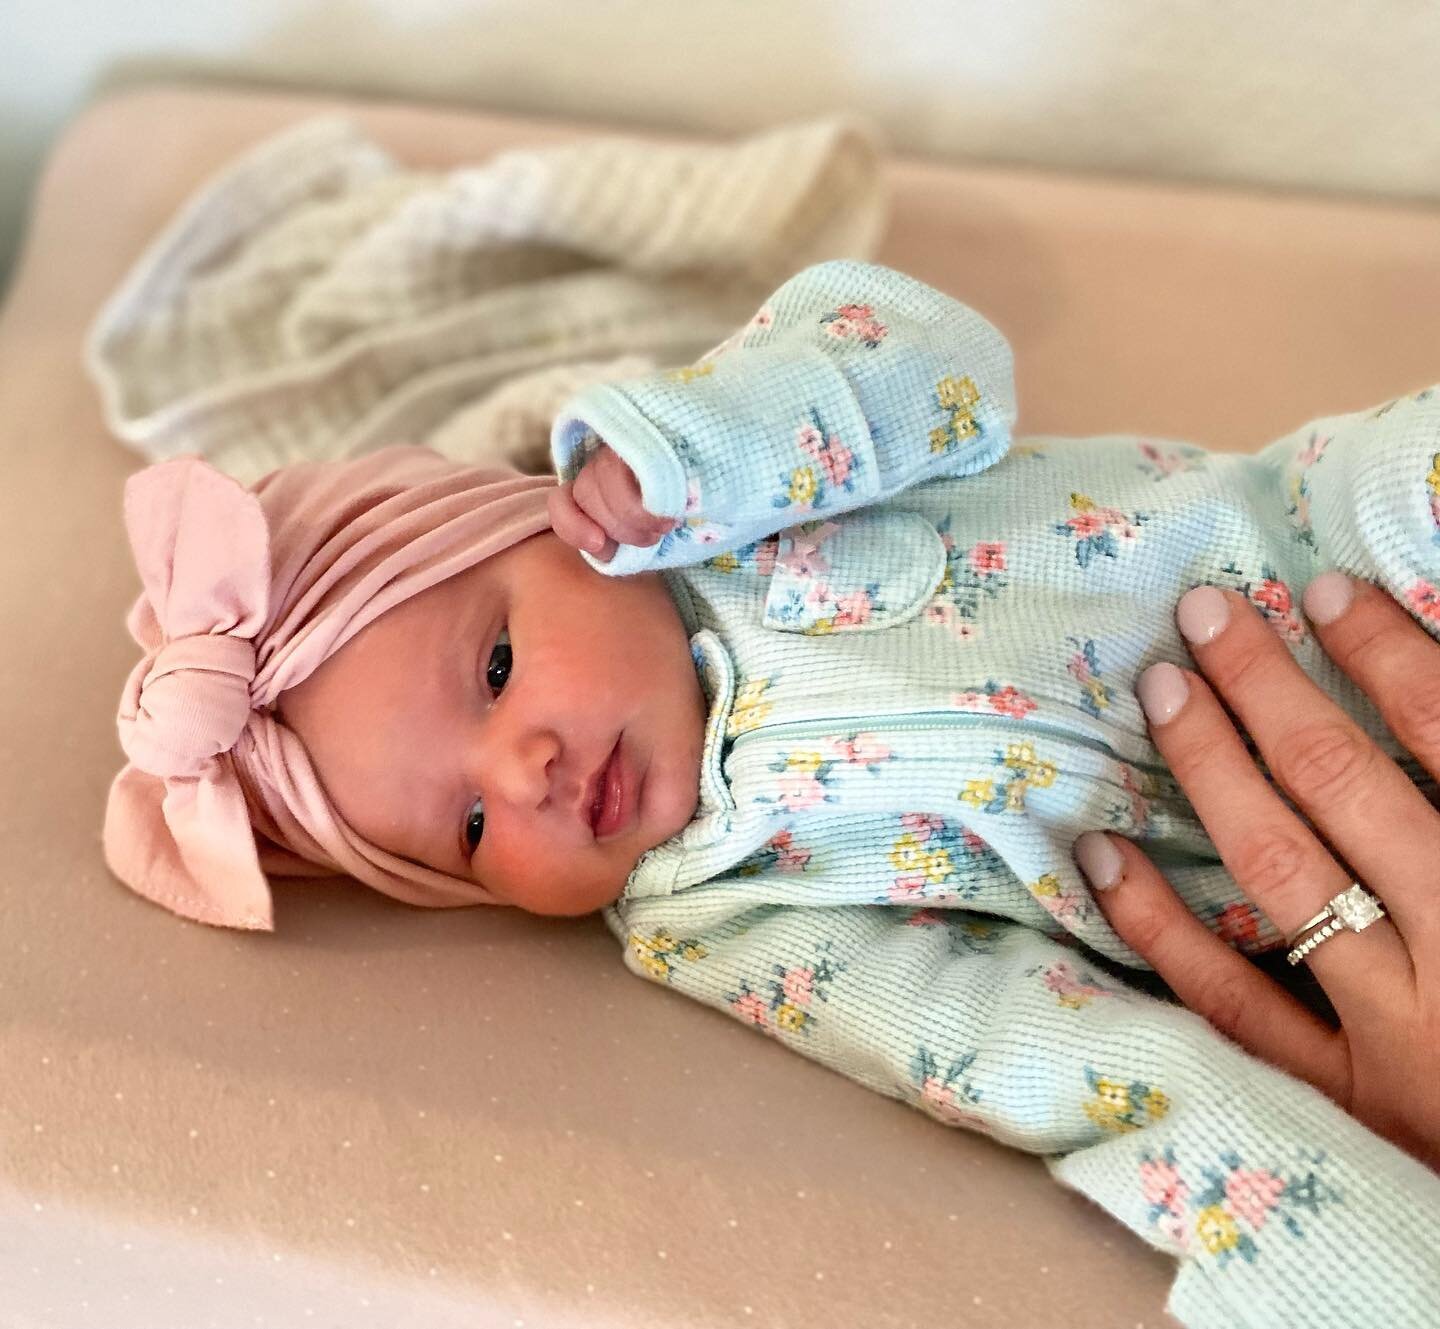 And just like that, our little Emma Johanna Ikard arrived three weeks early, on Feb 4 🥰. While we&rsquo;re still in the blur that is newborn life, I absolutely love how full our family feels with her finally here. She is just simply delightful in ev